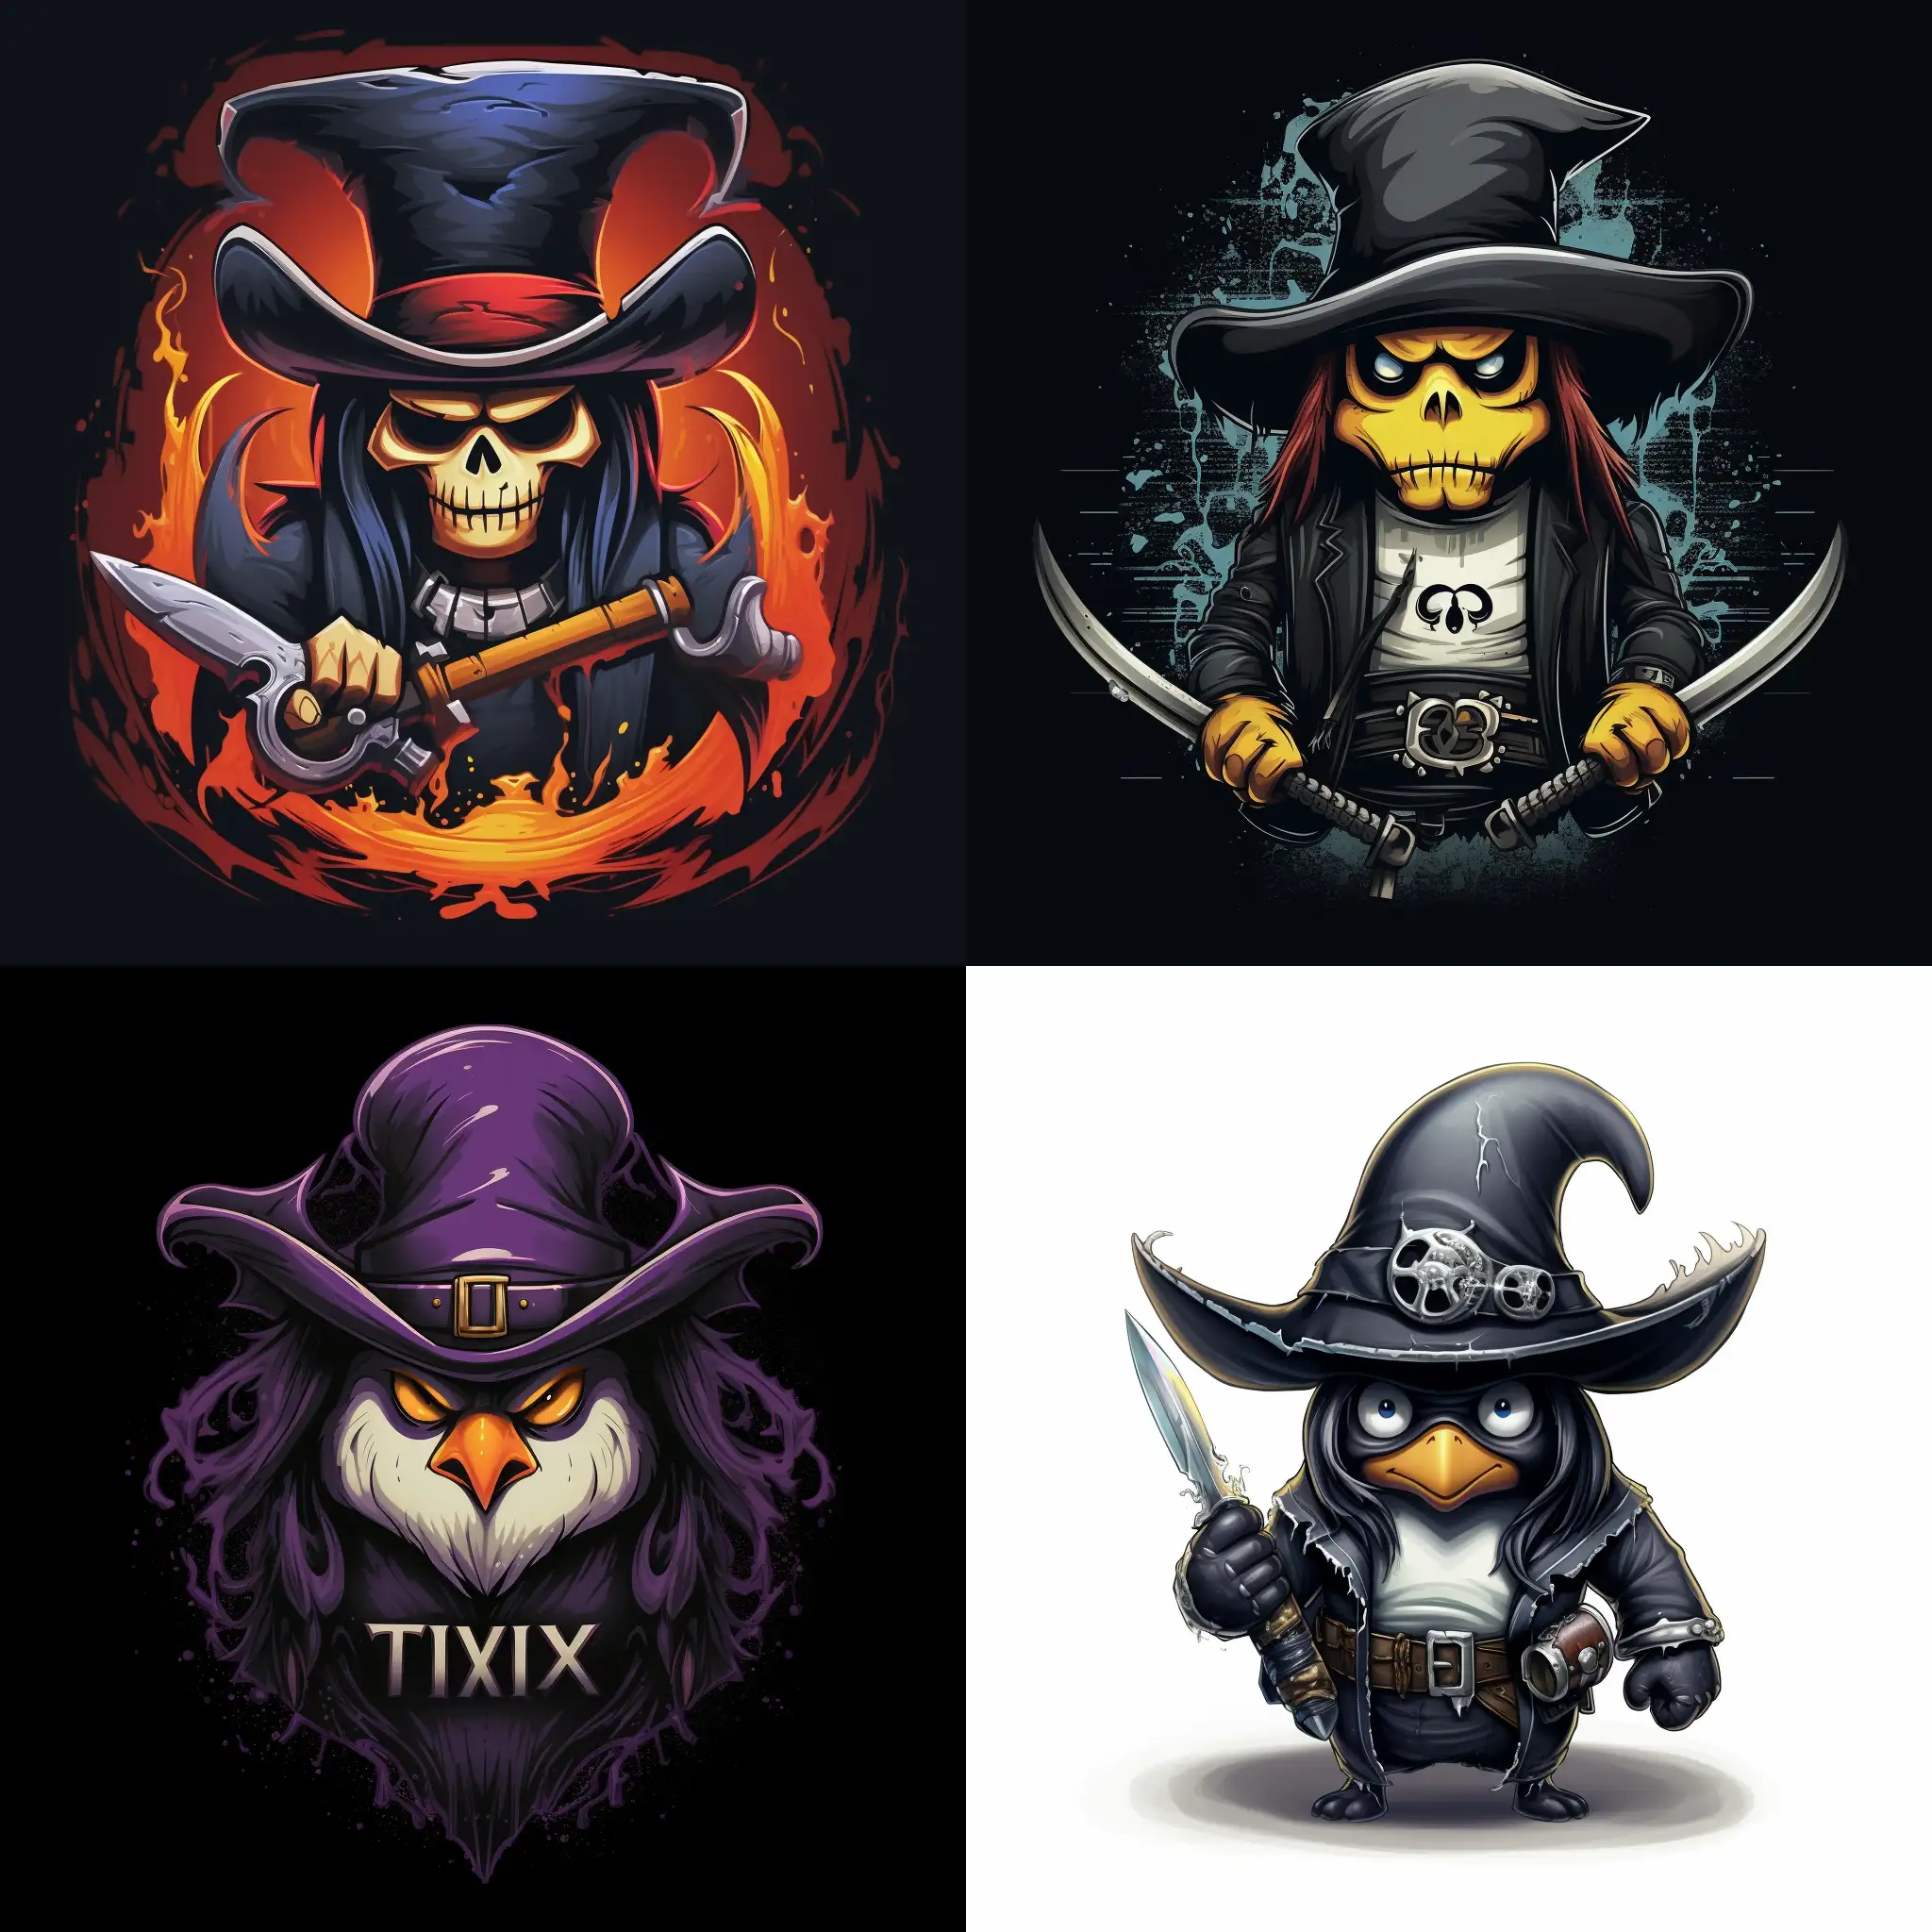 Tech-Wizard-Pirate-Jolly-Roger-and-Linux-Tux-Mascot-Fusion